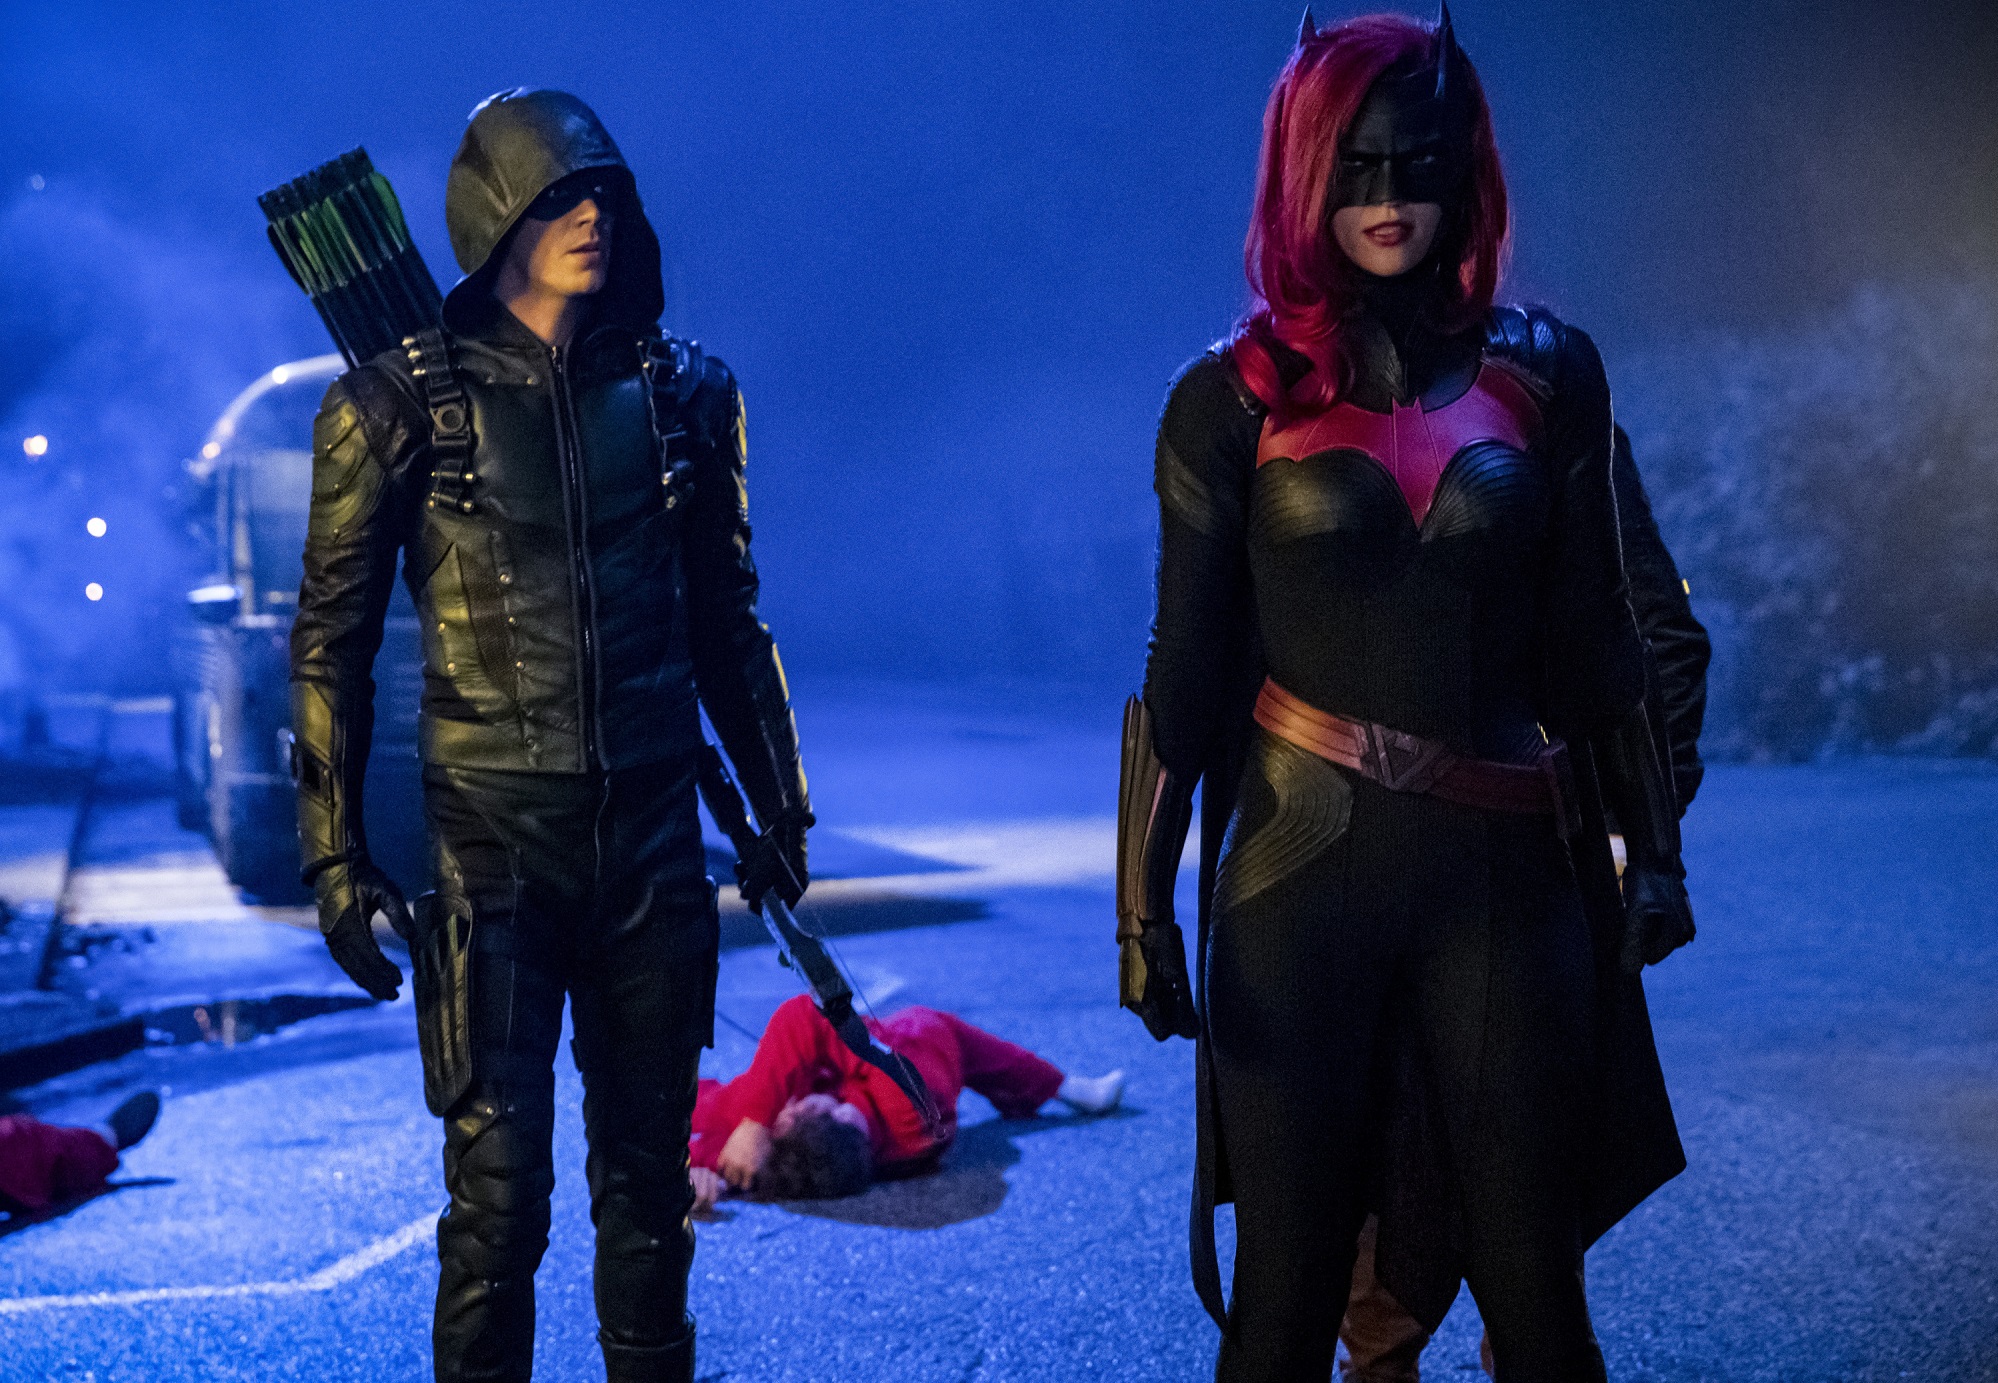 Elseworlds: More Intriguing Photo Released